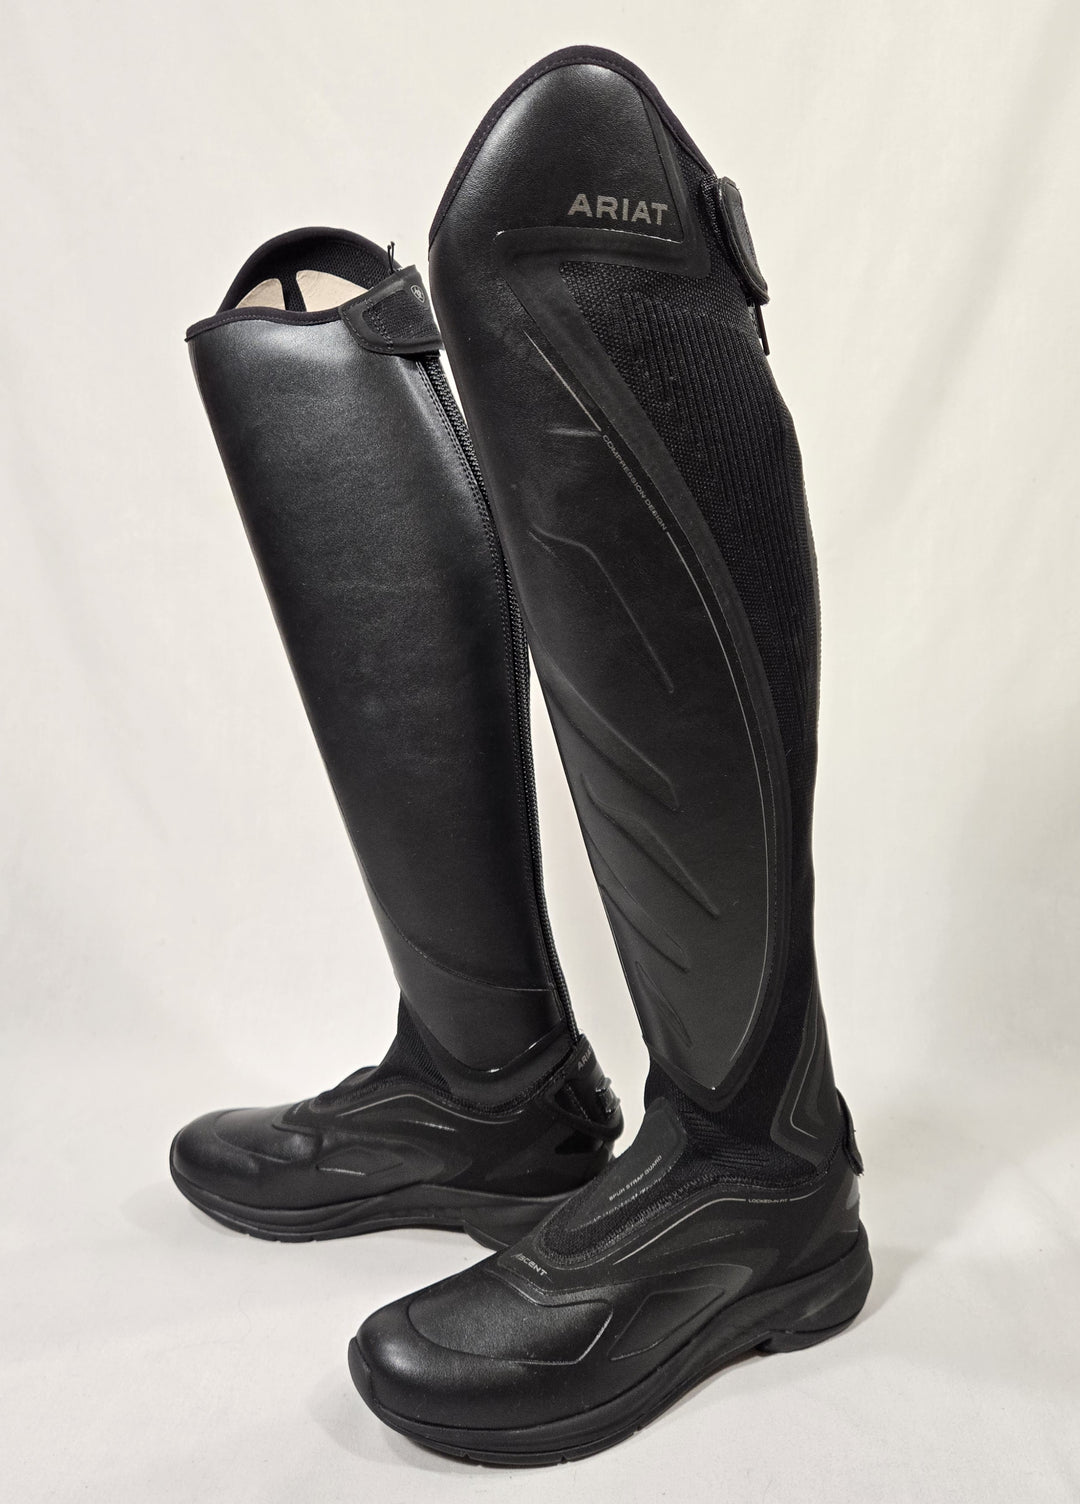 Ariat Ascent Tall Boots - 38.5 (US 8 Slim Tall) - New! – The Show Trunk